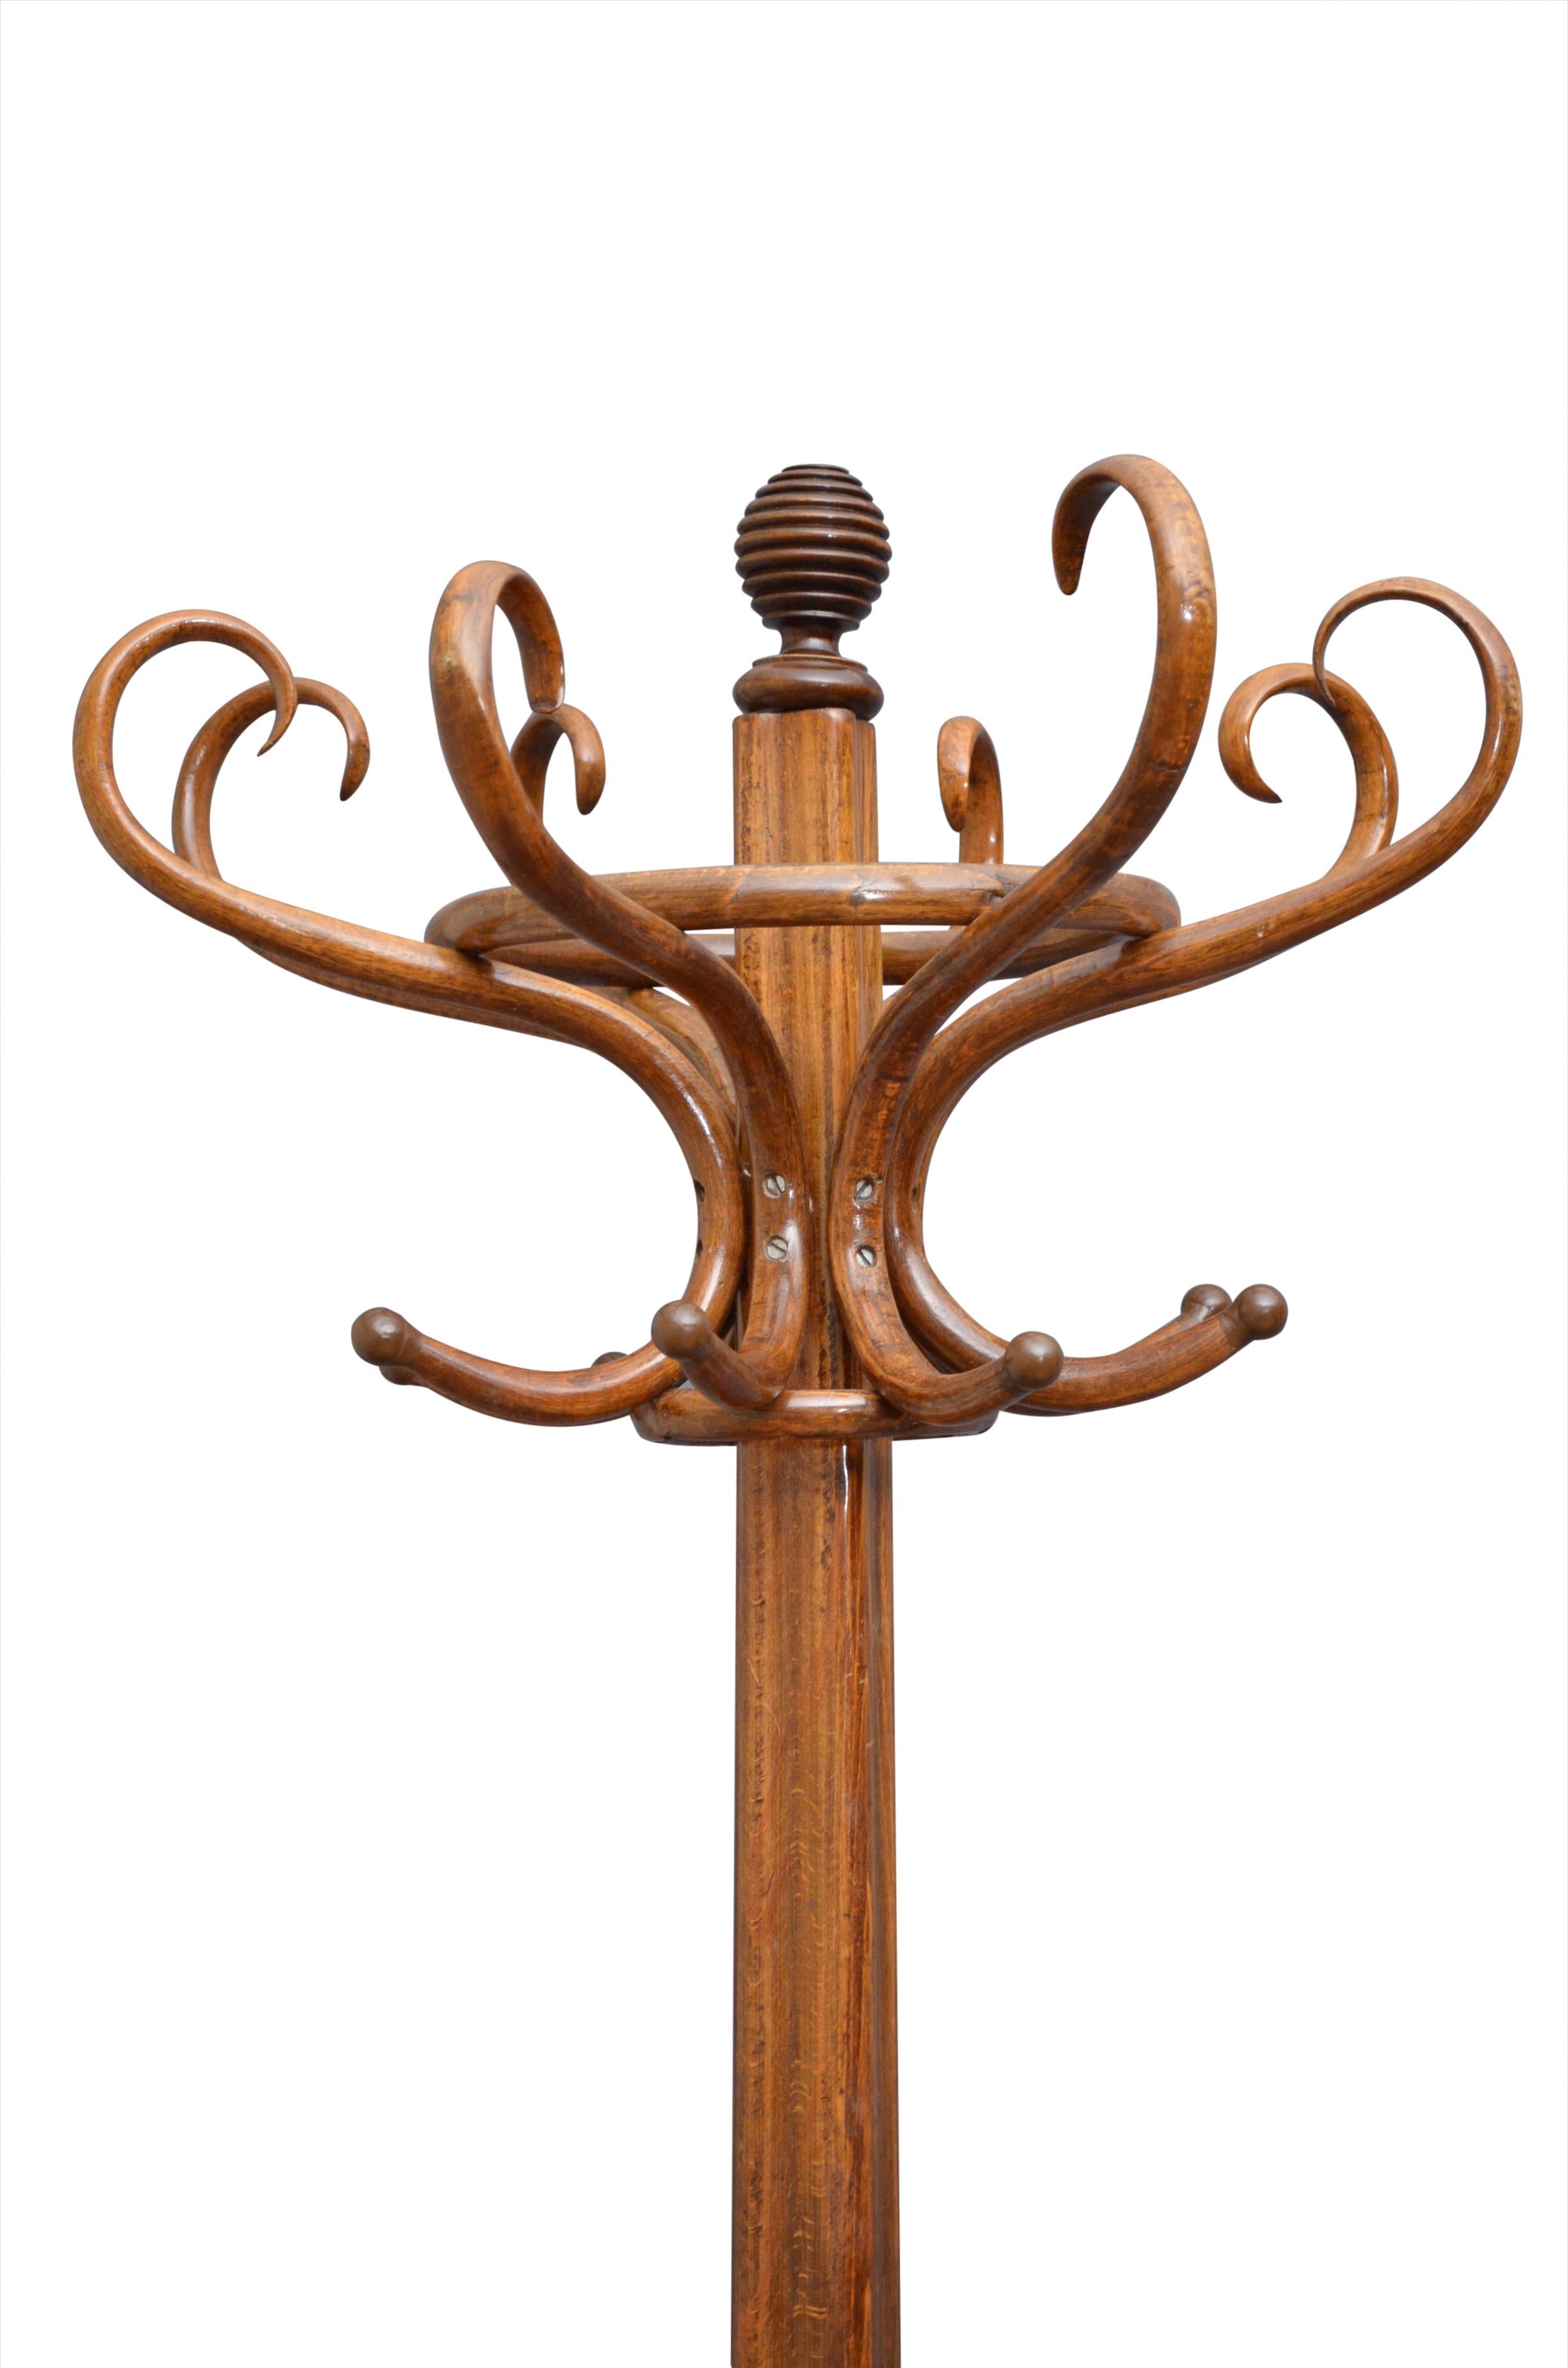 K0387 Elegant bentwood hat stand / hall stand possibly by Thonet, having 8 coat hooks and 8 bentwood scrolls for hats, surmounted by a beehive finial, supported on cluster column terminating in 4 down swept legs with a ring for sticks and umbrellas.